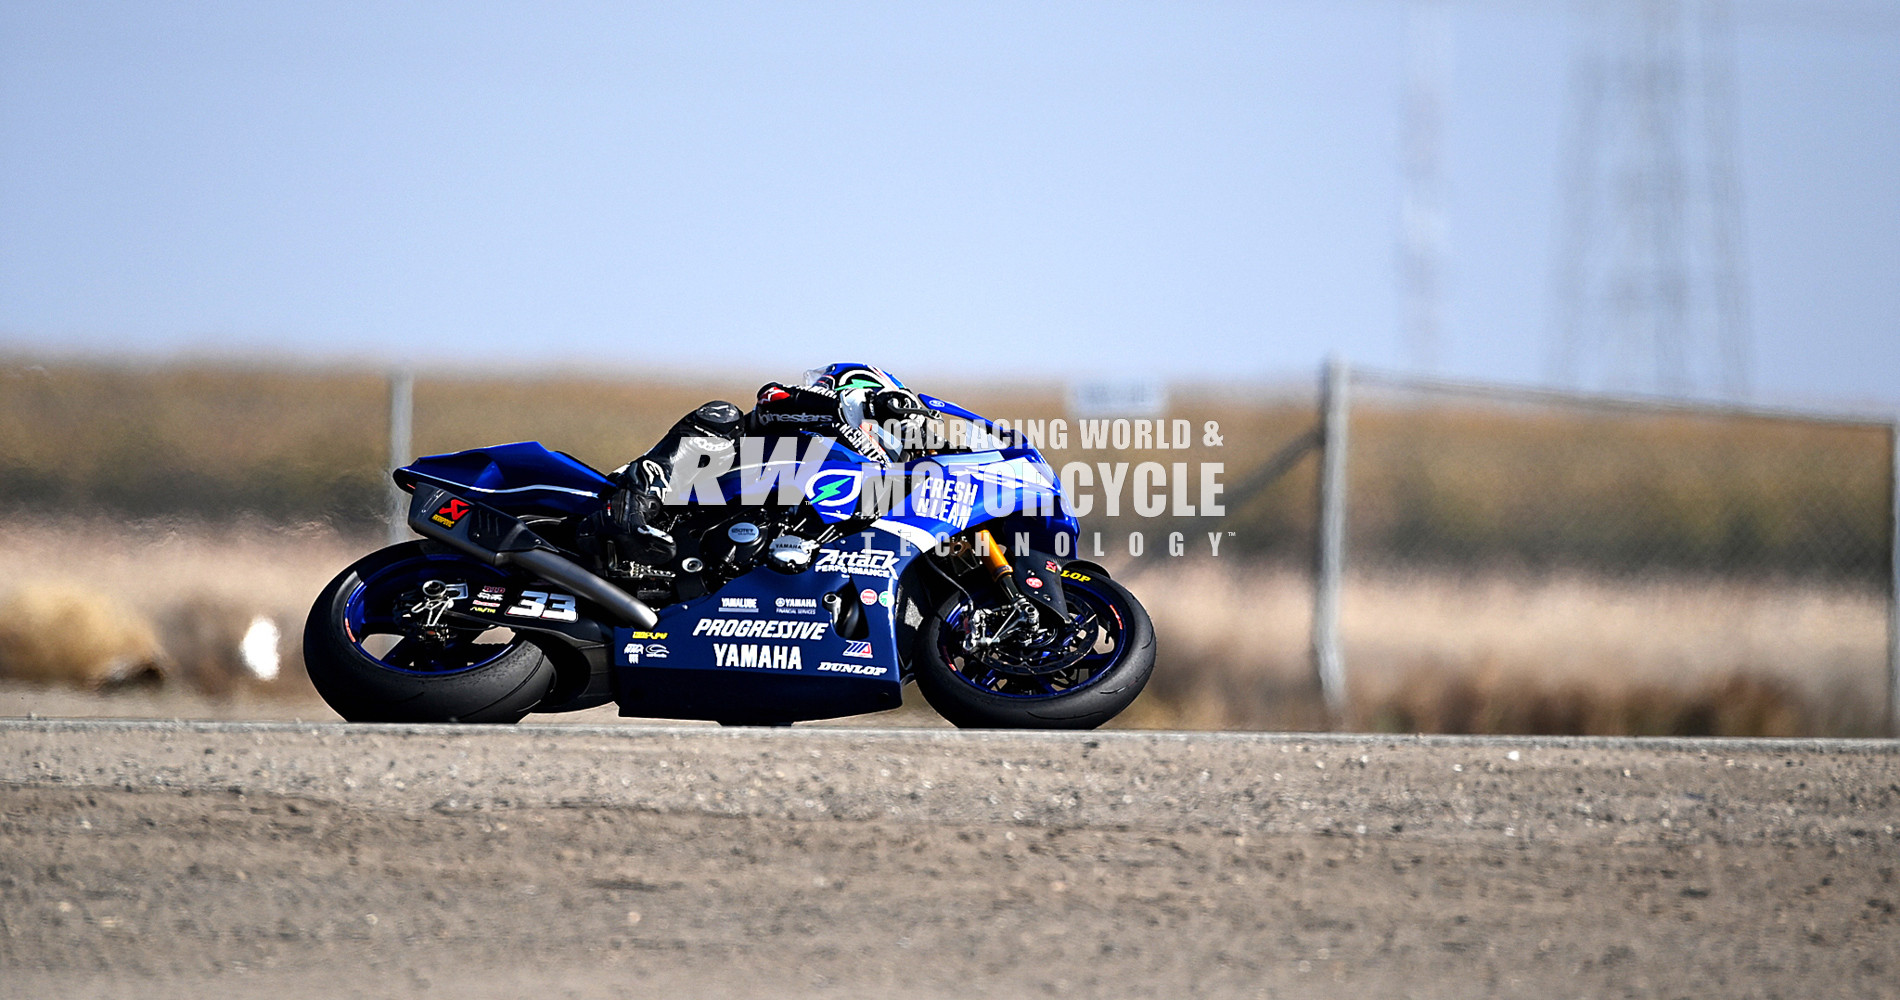 MotoAmerica Champion Jake Gagne and his Yamaha Superbike on Dunlop Q5 track-day tires at Buttonwillow. Photo courtesy Dunlop.